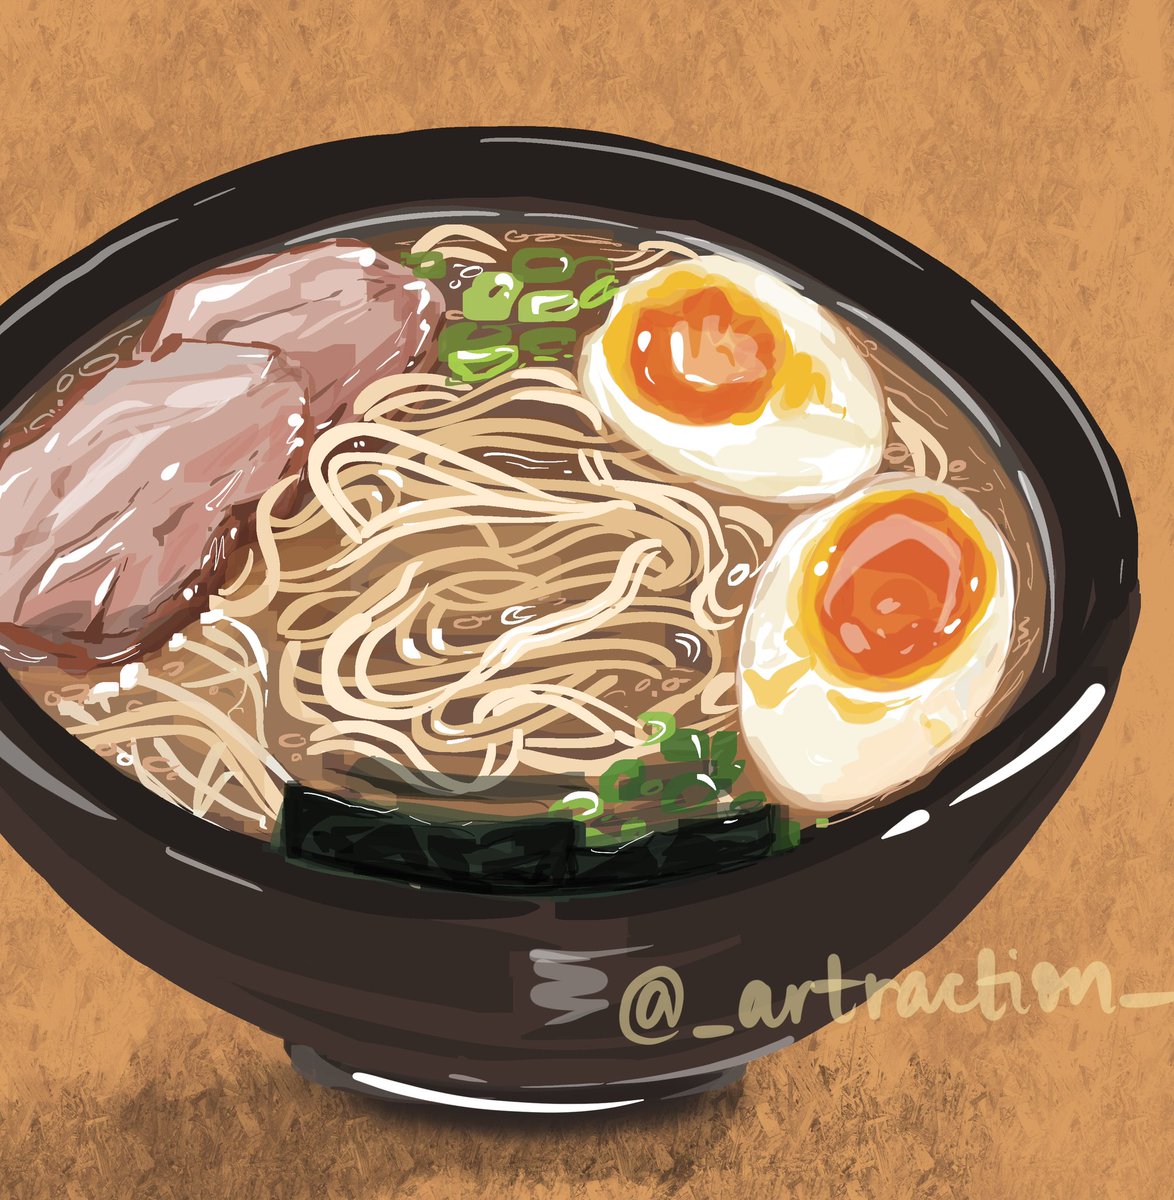 Food illustration # 2 🍜 I love how this turned out 😭✨